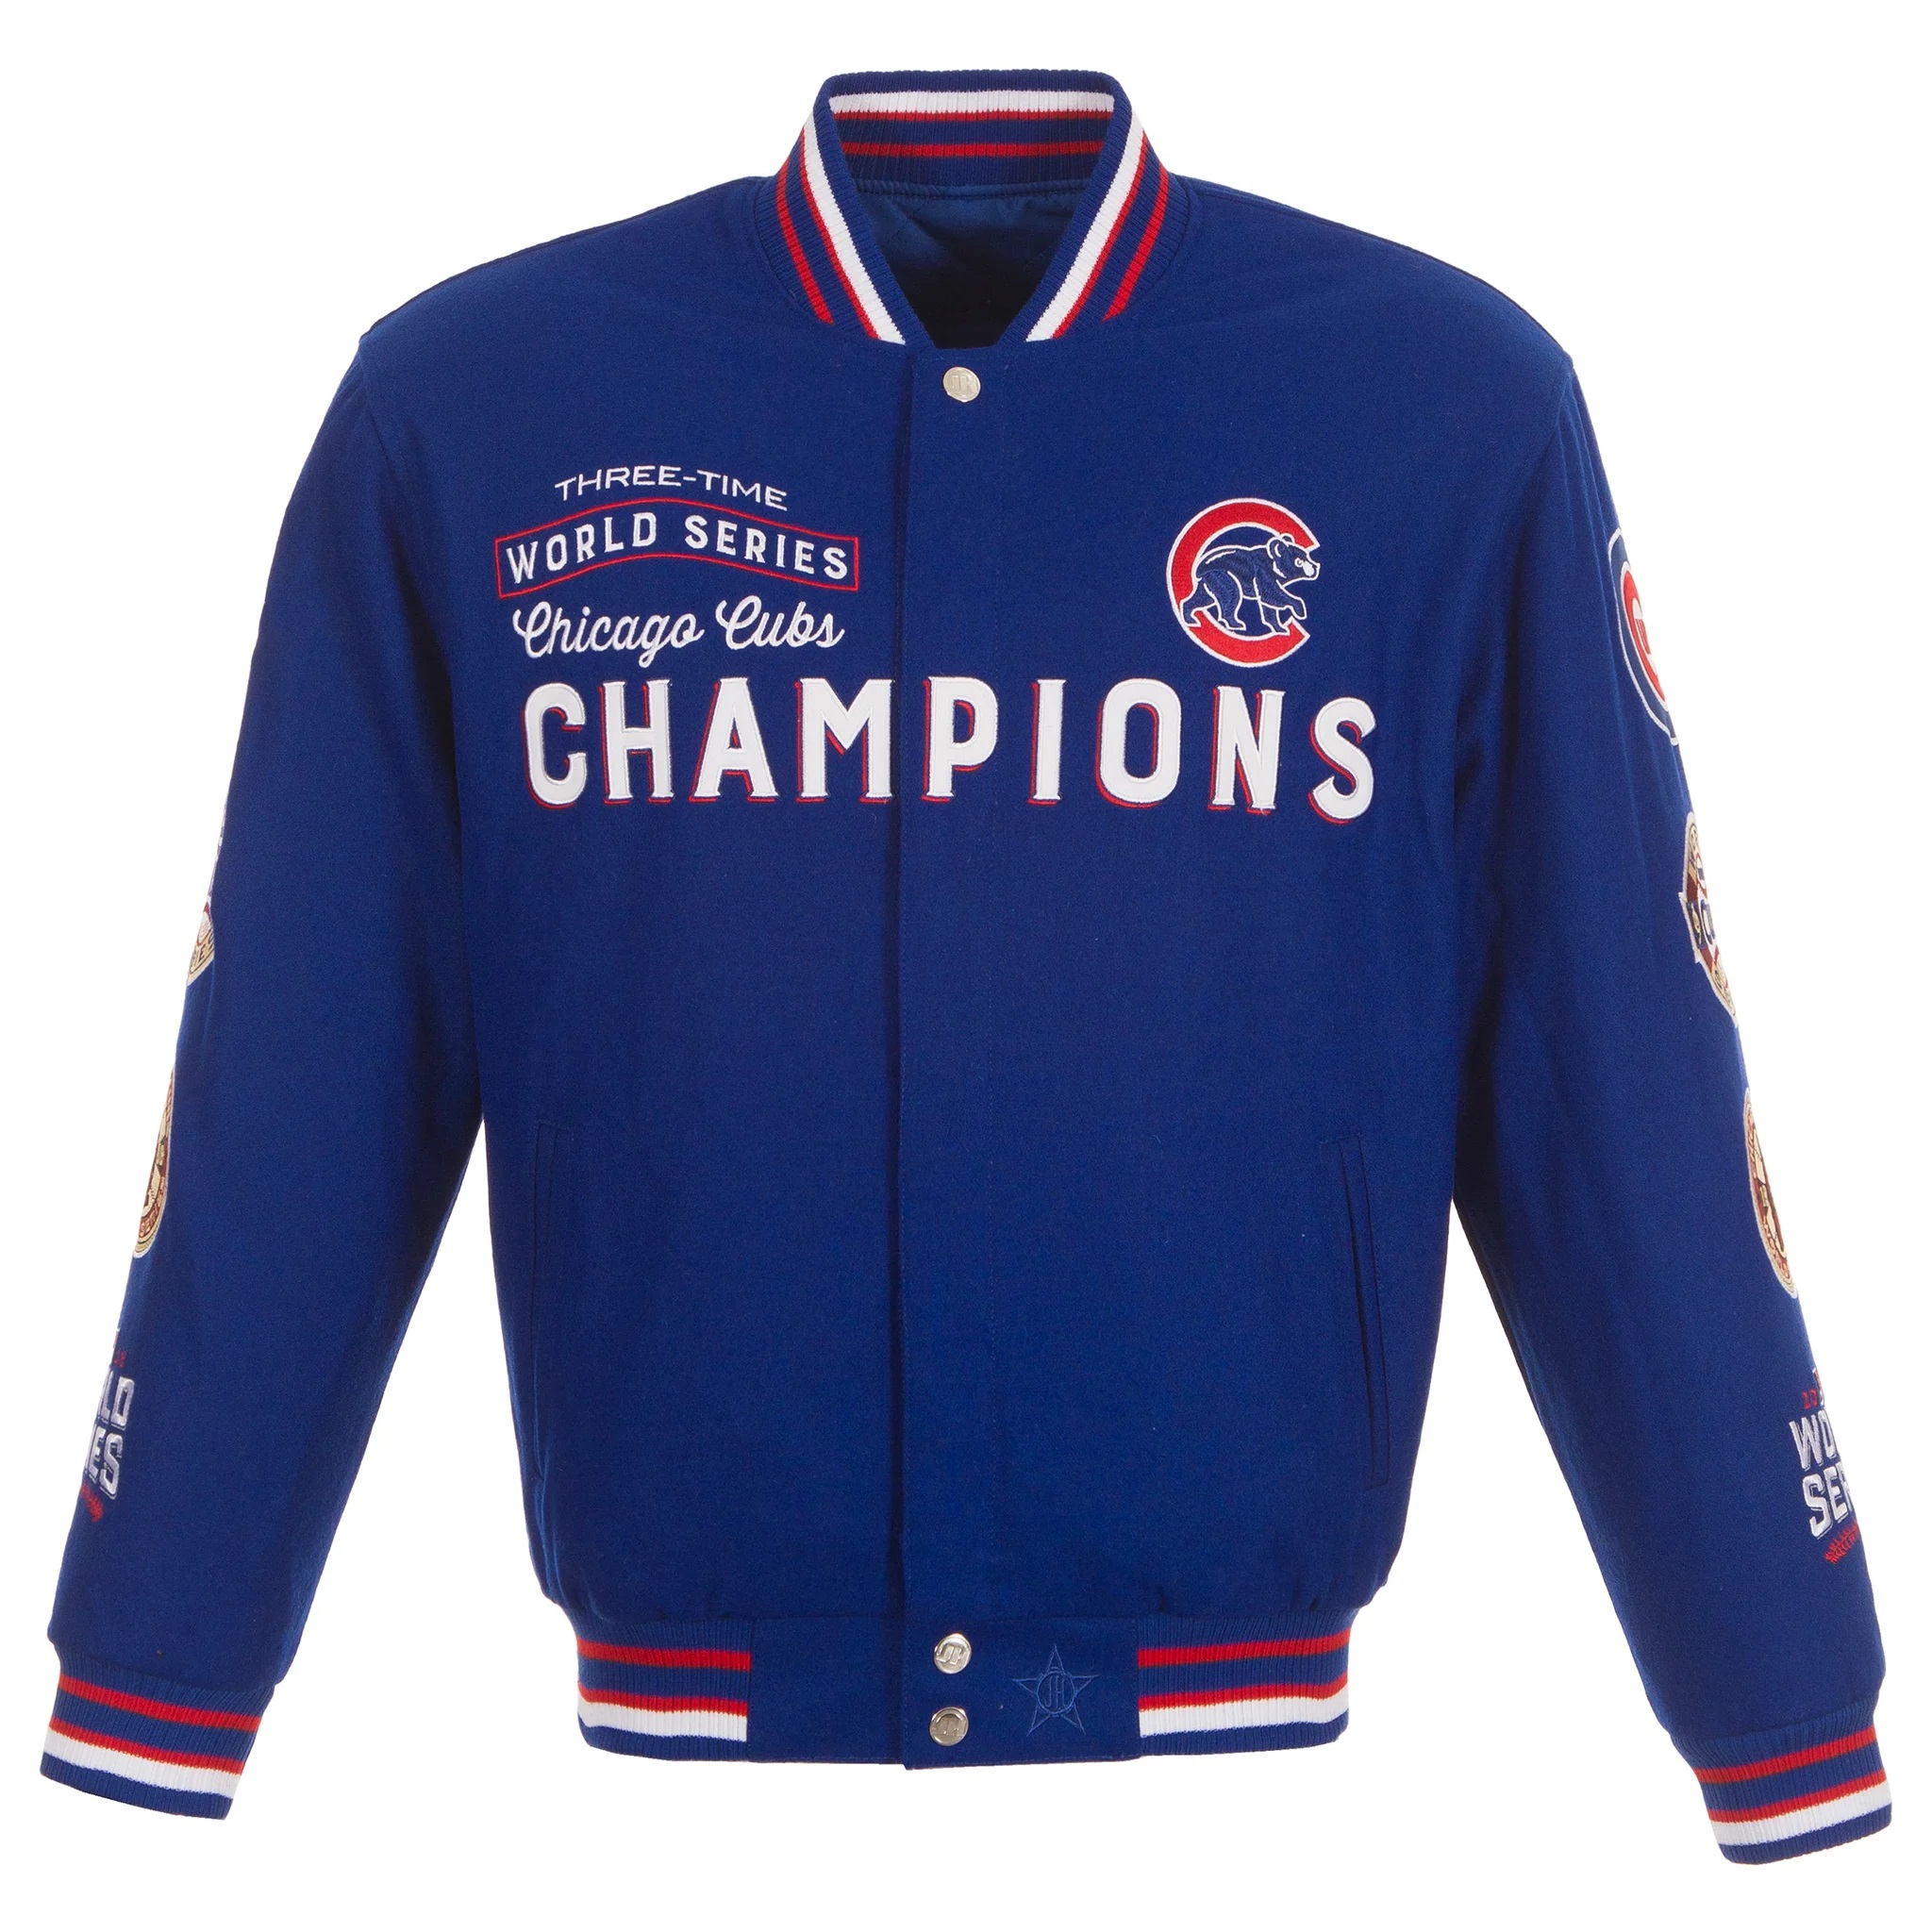 Chicago Cubs World Series Champions Royal Blue Jacket